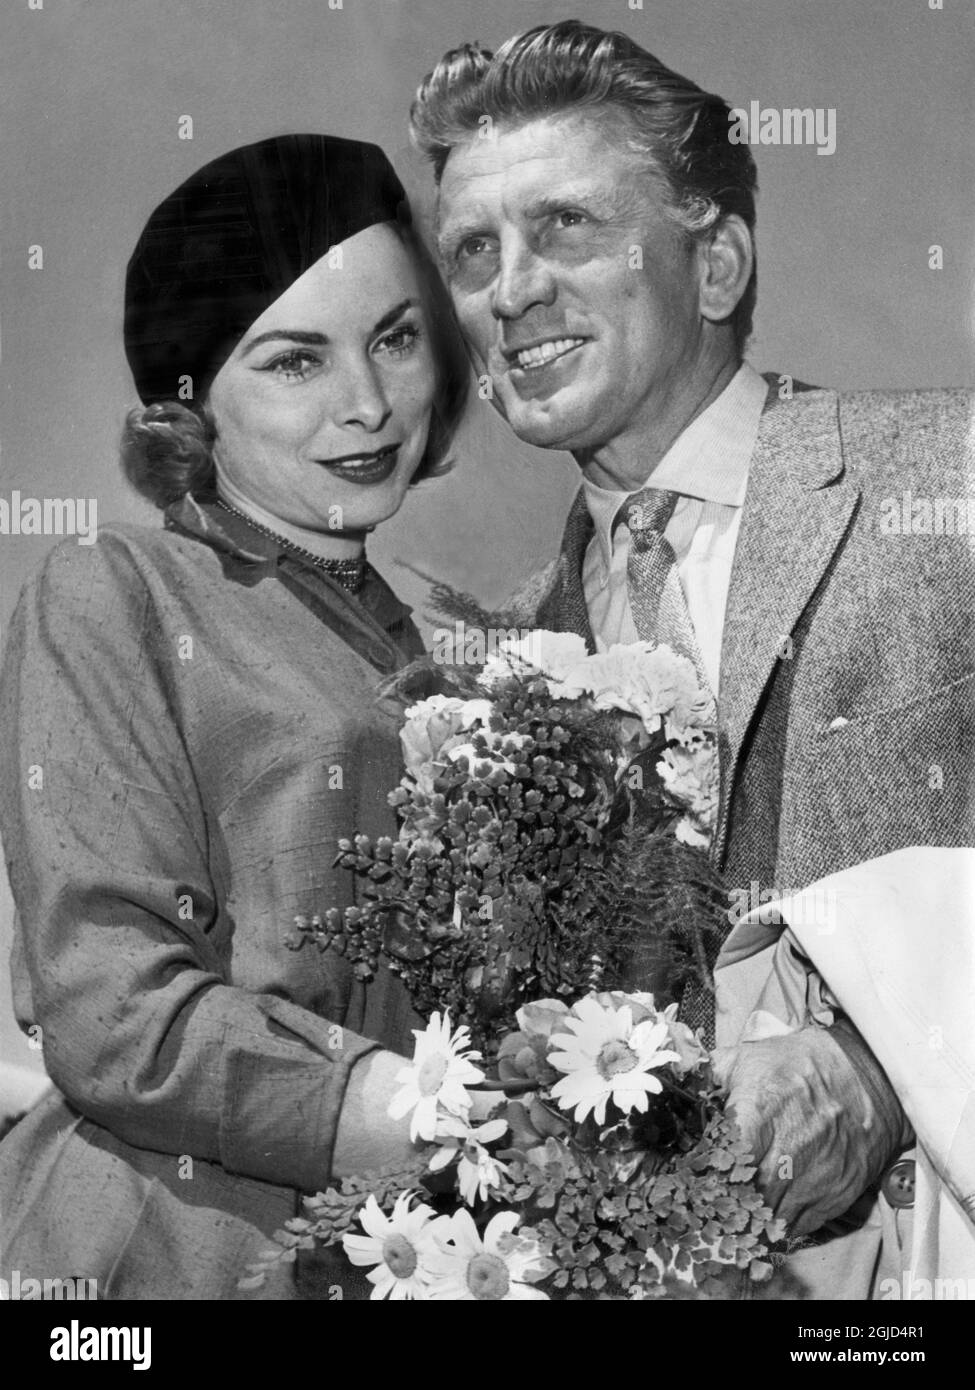 ARKIV STOCKHOLM 1957 JUNI US actors Janet Leigh and Kirk Douglas in Stockholm, Sweden, June 1957. Leigh and Douglas visited Stockholm on their way to the filming of the movie 'The Vikings' in Norway. Foto: Lennart Edling / Dagens Bild / TT / Kod: 3012  Stock Photo